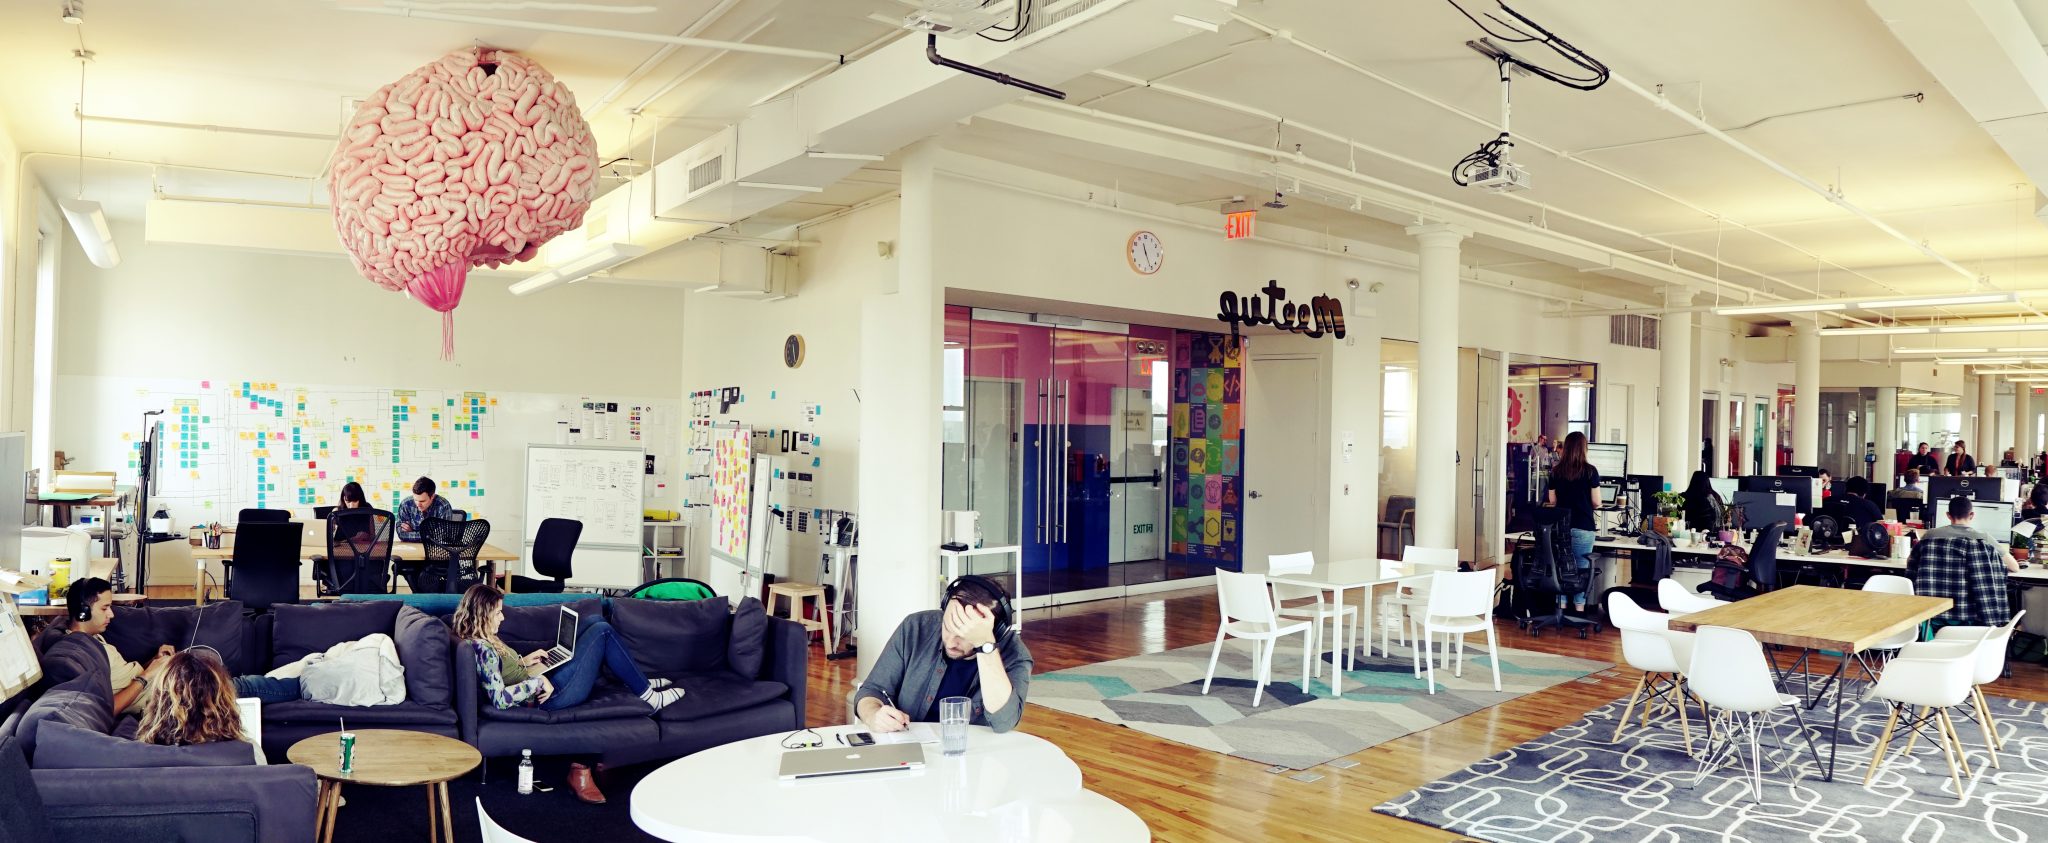 Meetup's New York offices